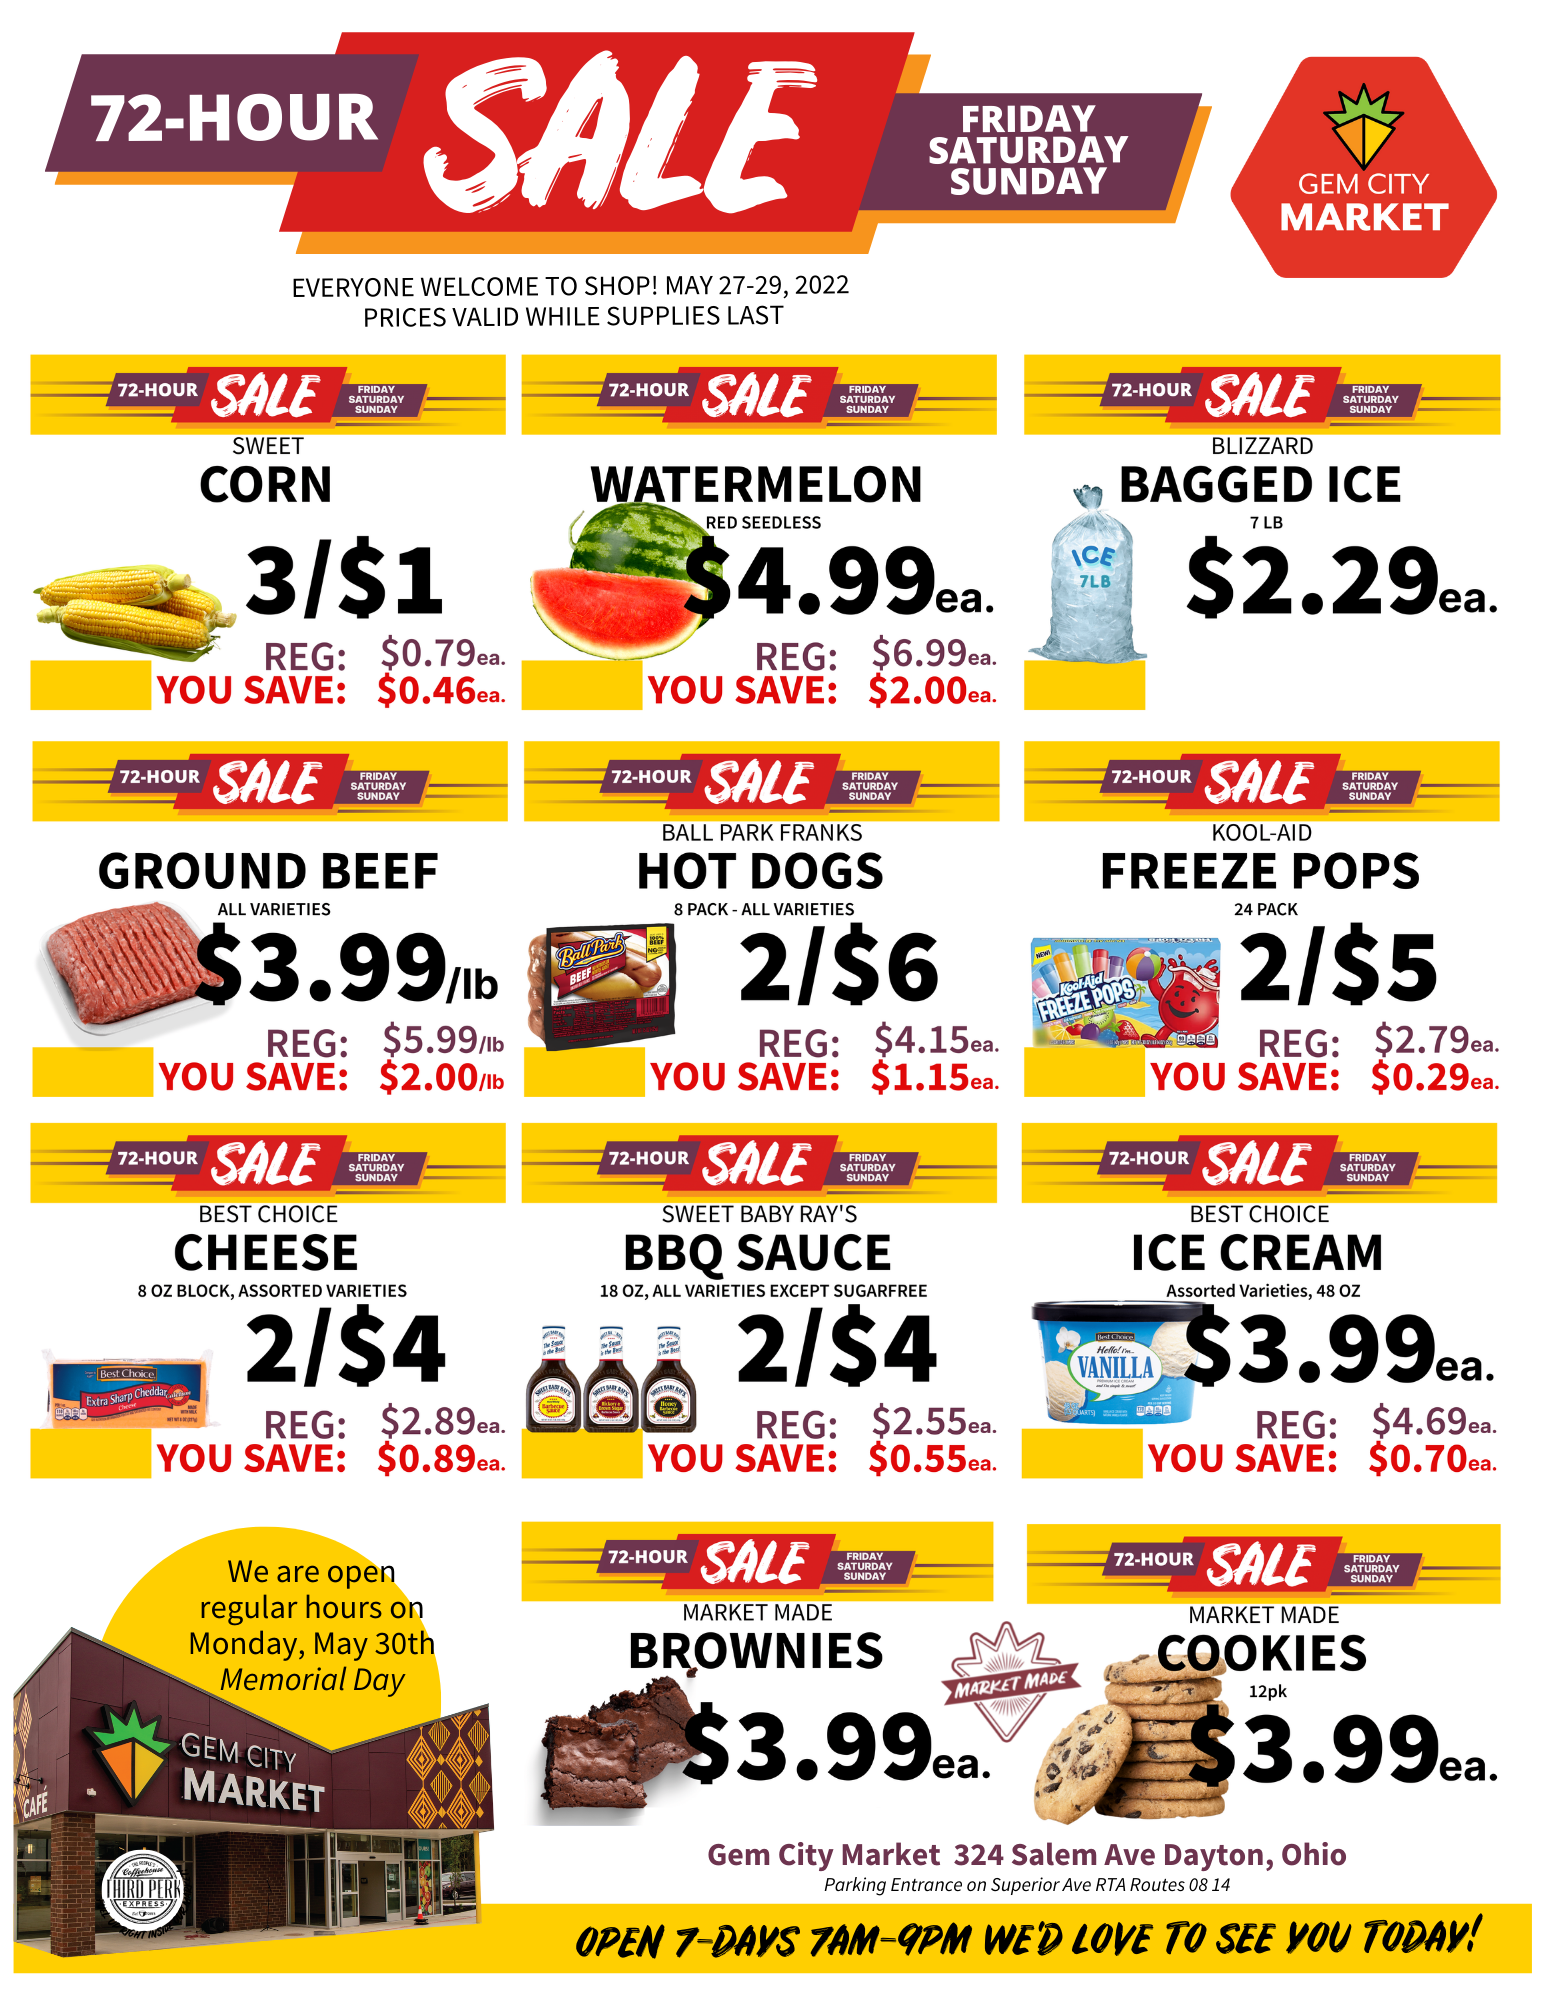 Weekly ad flyer, items and prices in post